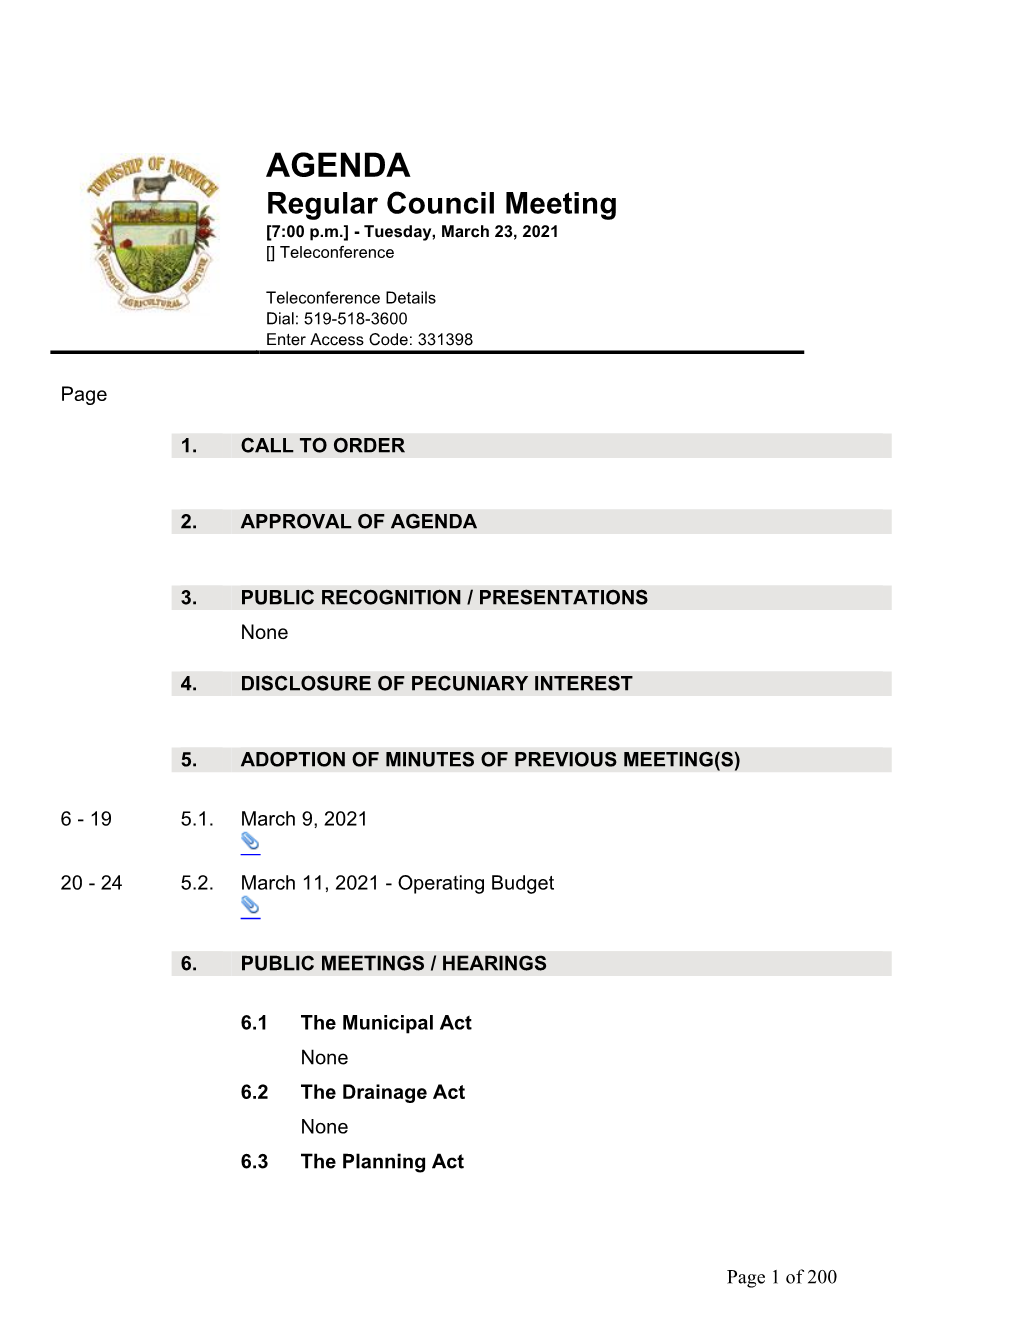 Regular Council Meeting [7:00 P.M.] - Tuesday, March 23, 2021 [] Teleconference